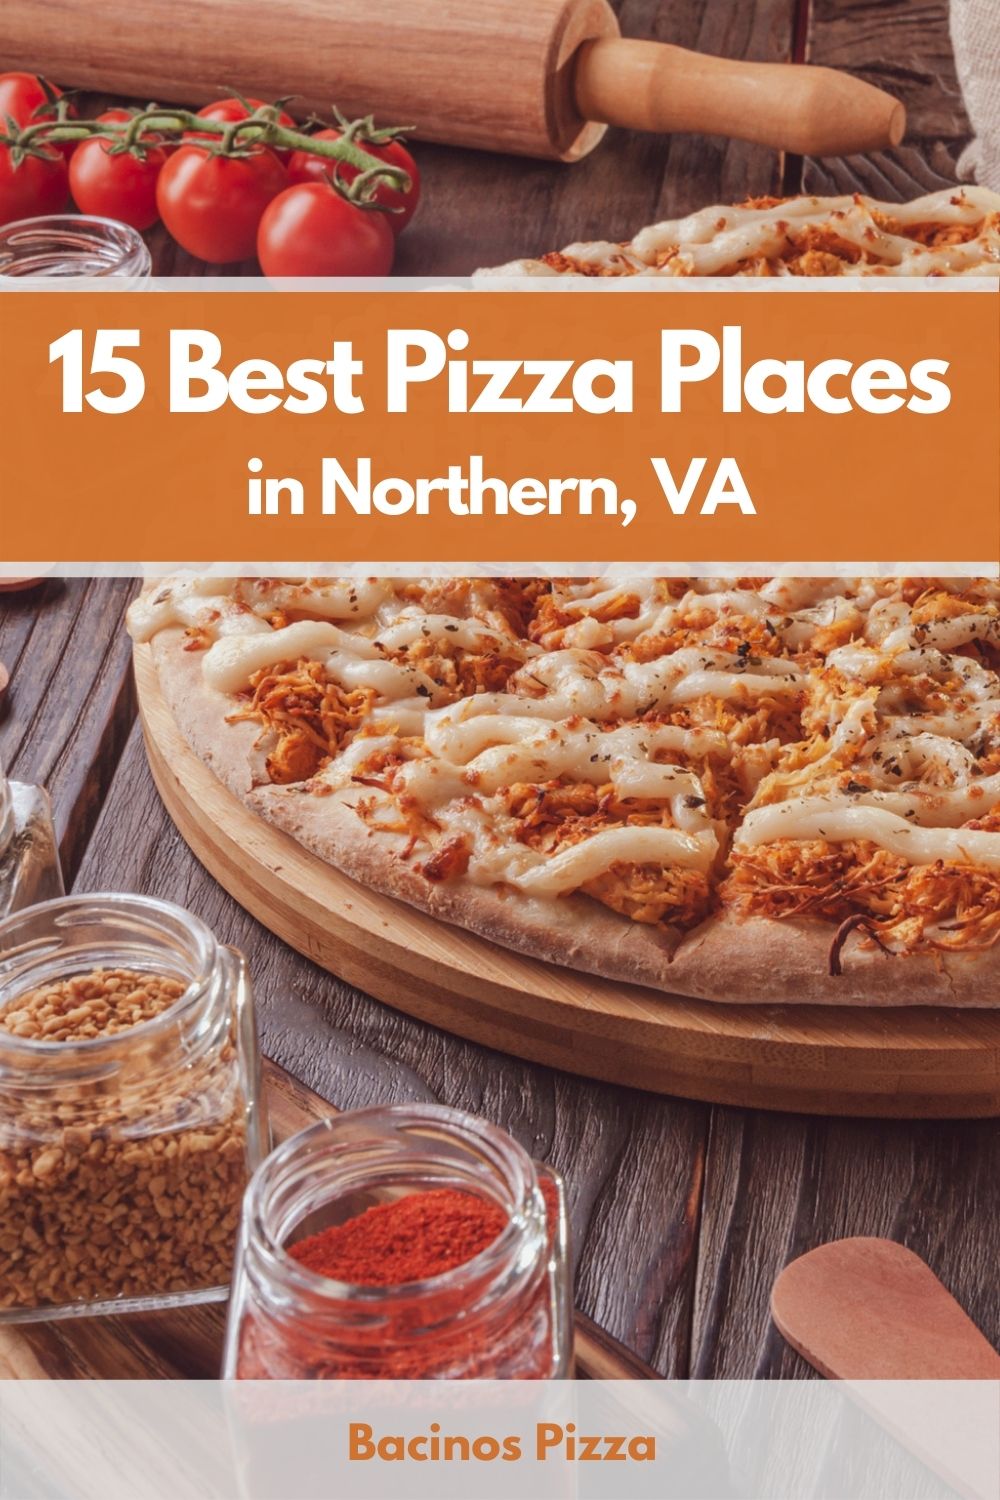 15 Best Pizza Places in Northern, VA pin 2